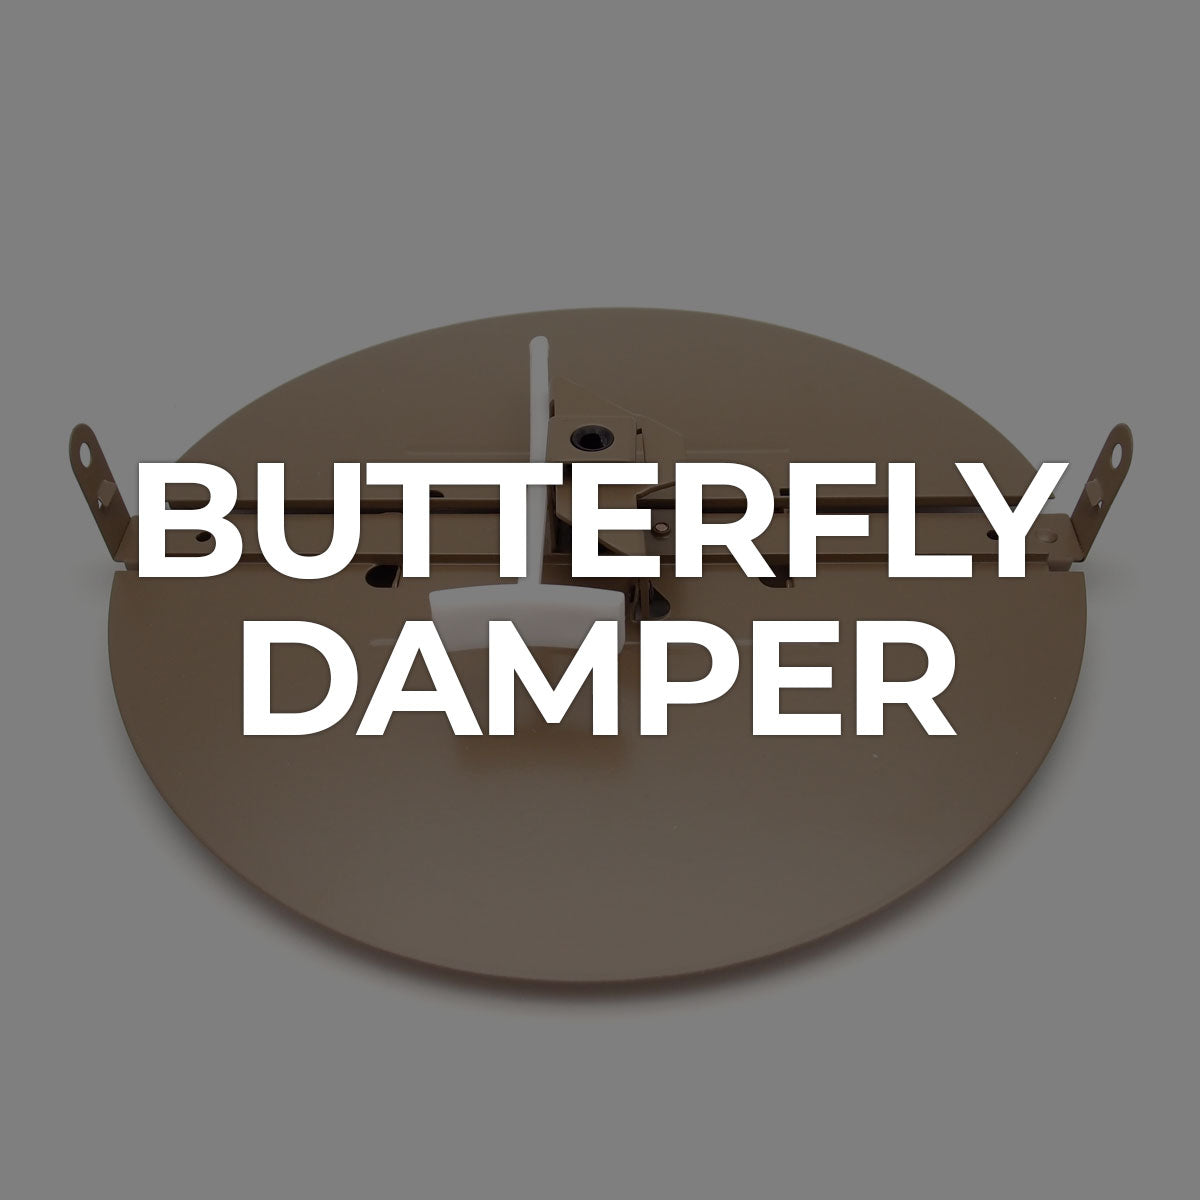 Search by Collections: Butterly Damper